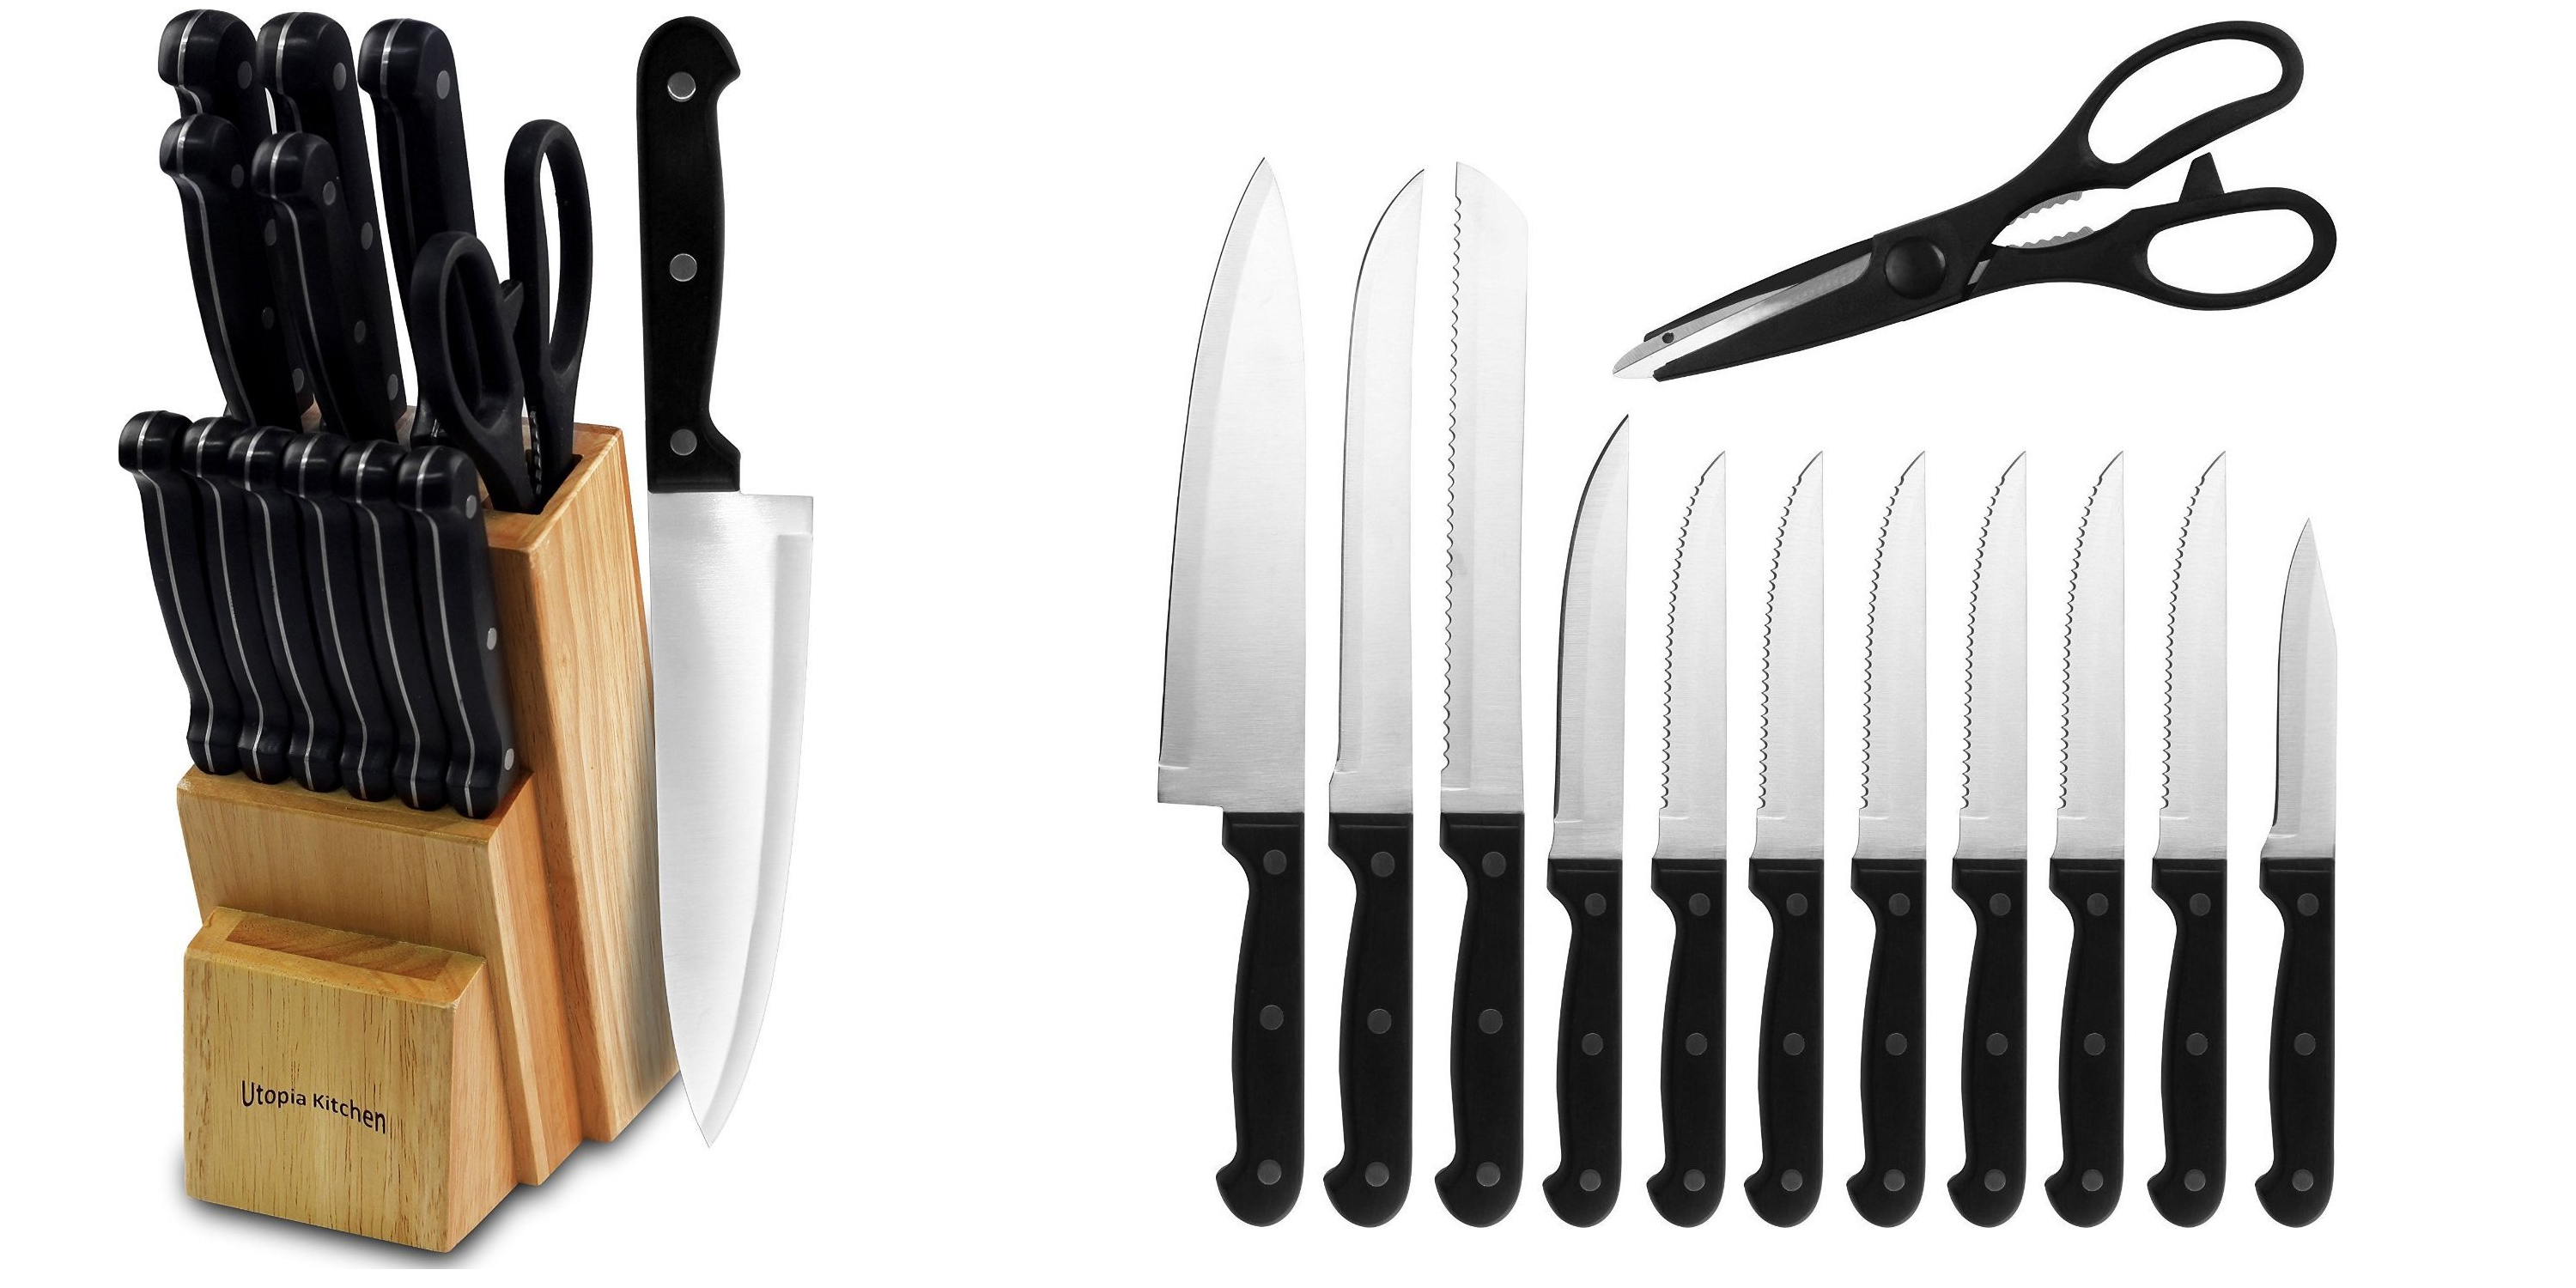 Highly Rated 13-pc Knife Set With Wooden Block Just $22.99!!